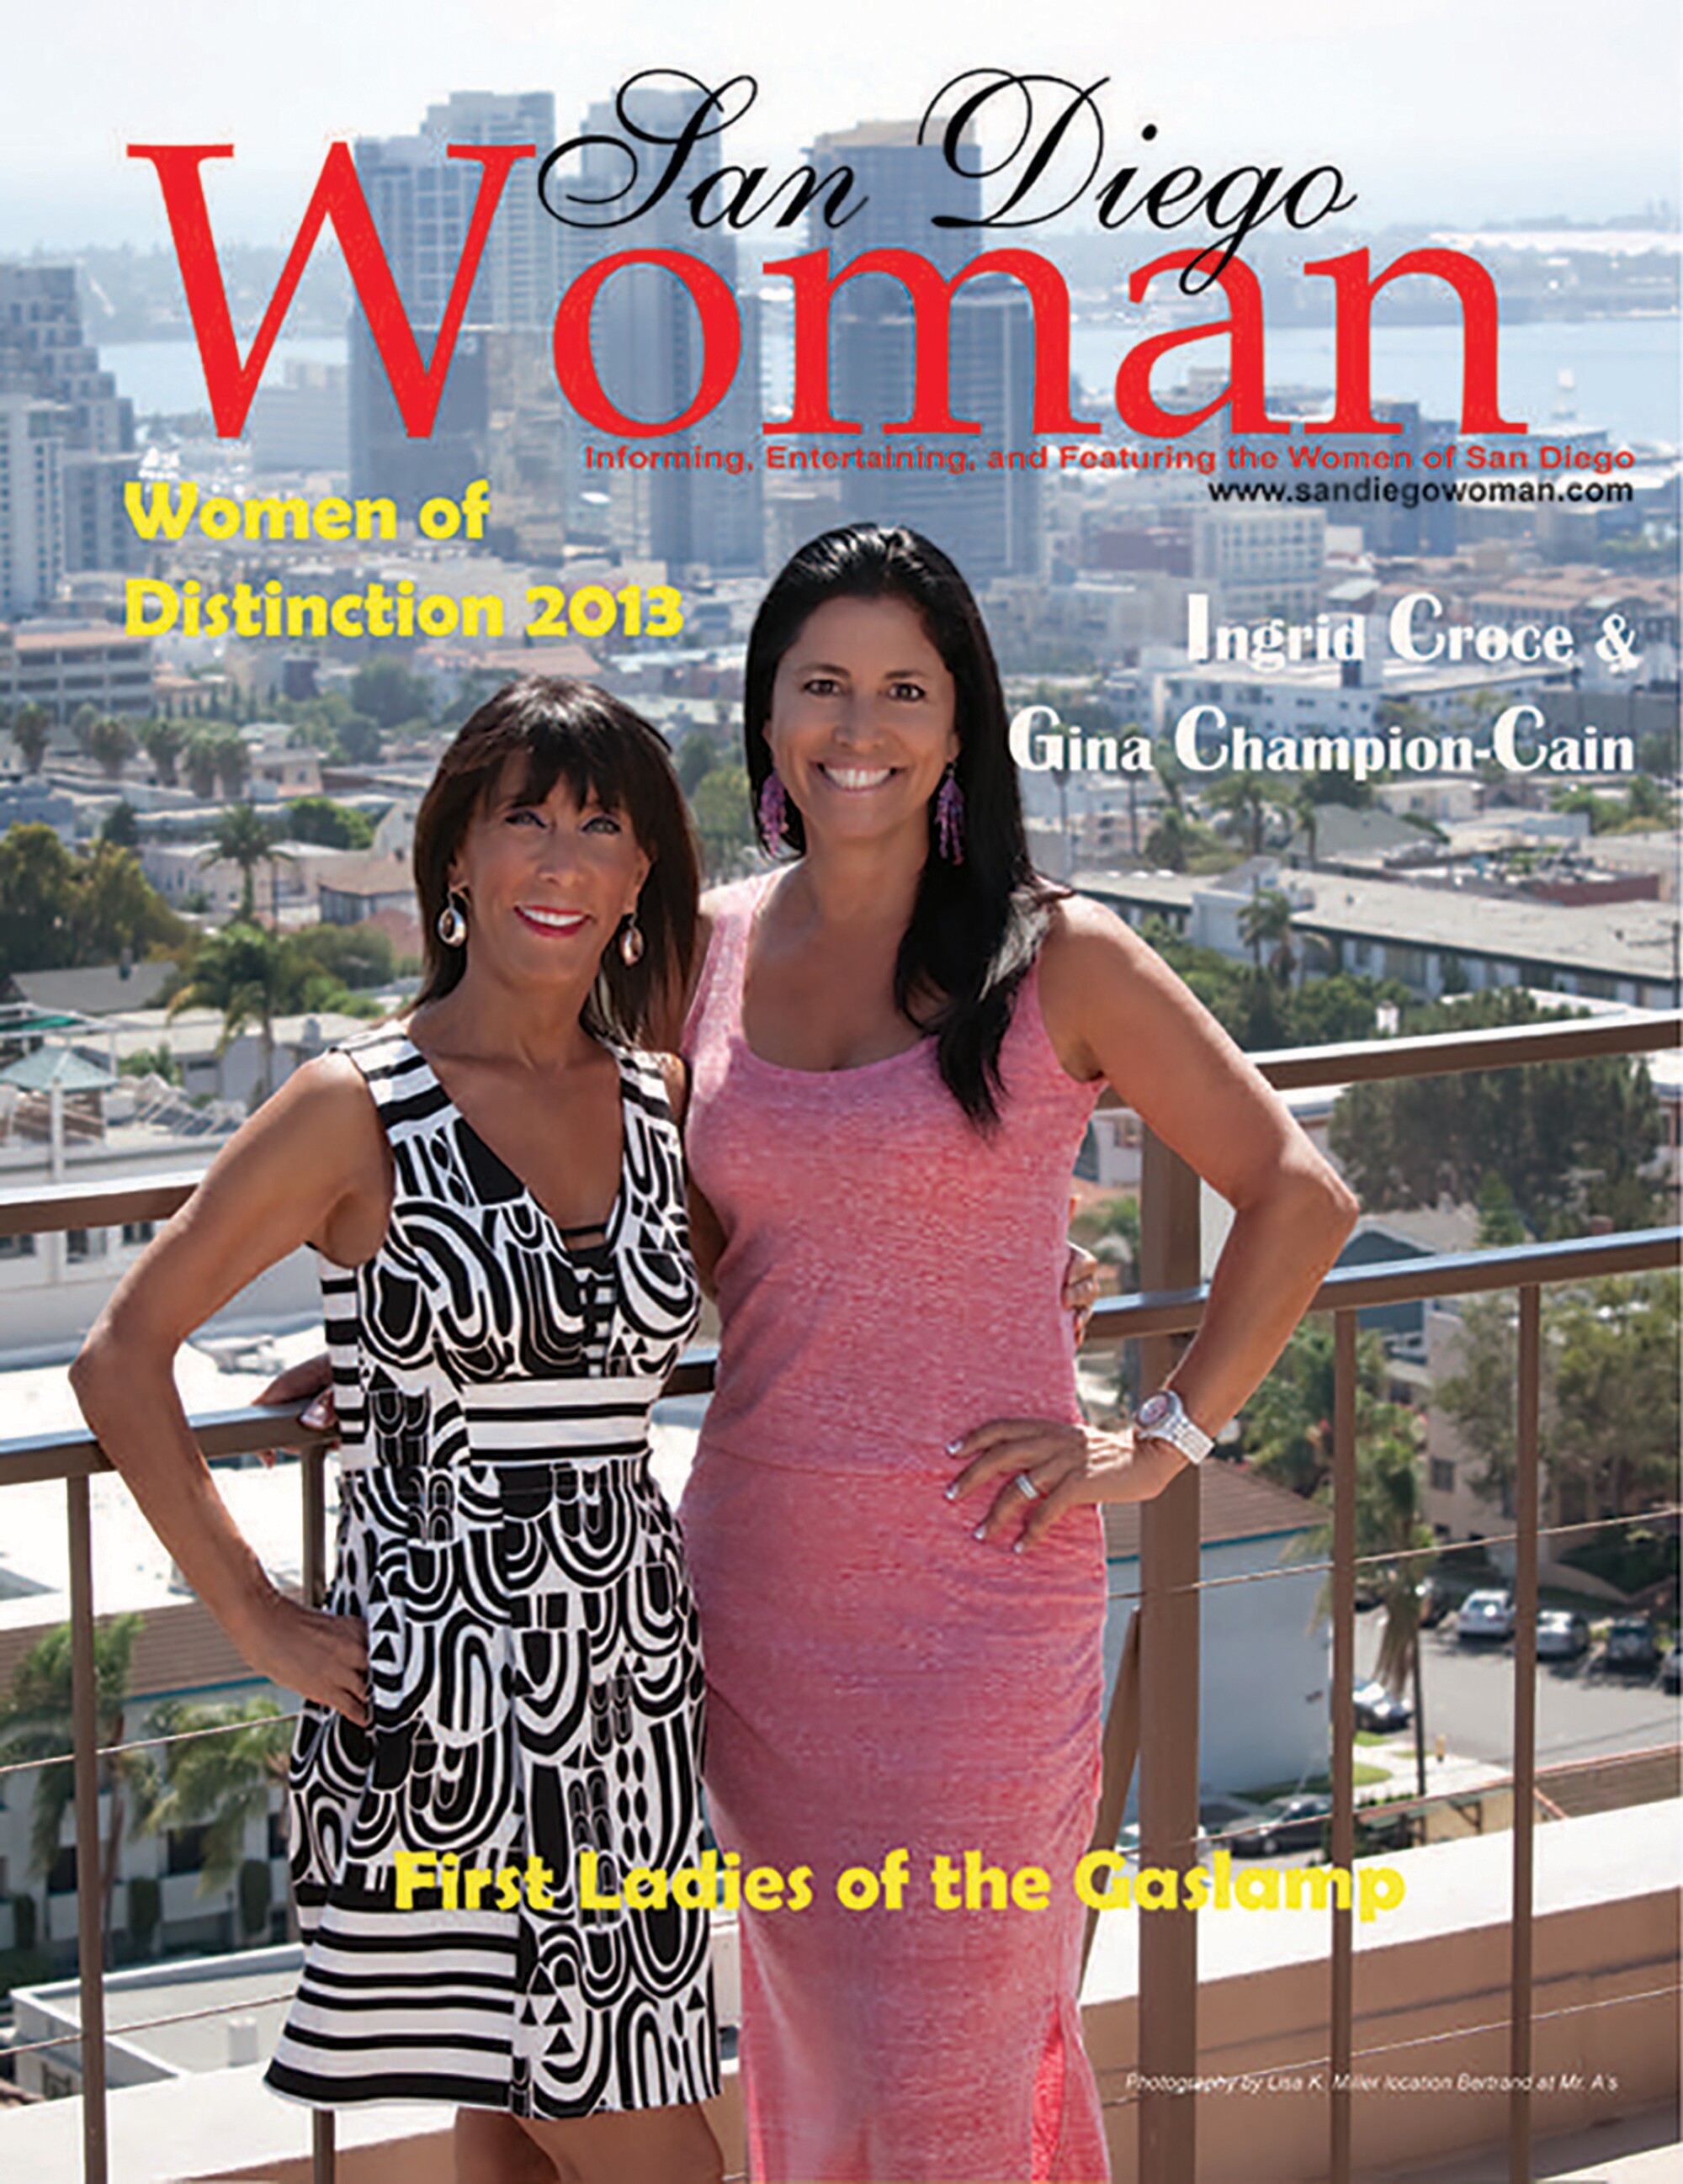 A cover of San Diego Woman magazine from 2013 featured Ingrid Croce (left) and Gina Champion-Cain.